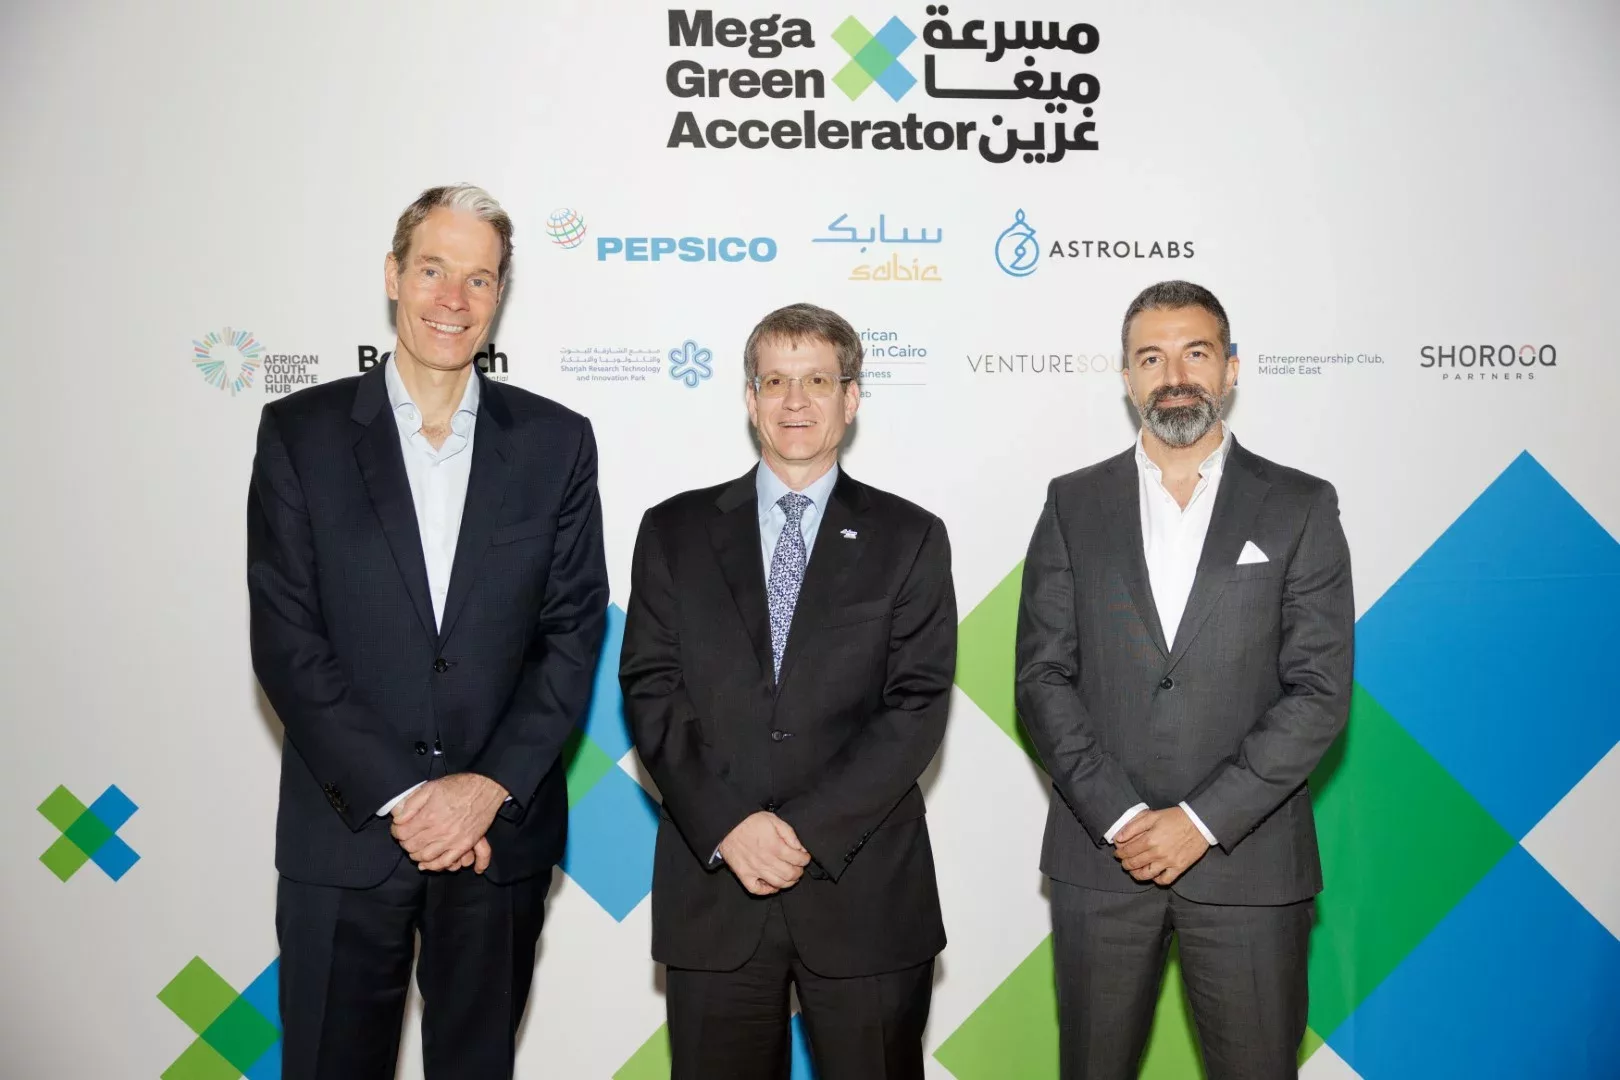 PepsiCo, SABIC and Partners Launch the Mega Green Accelerator, Powered by AstroLabs